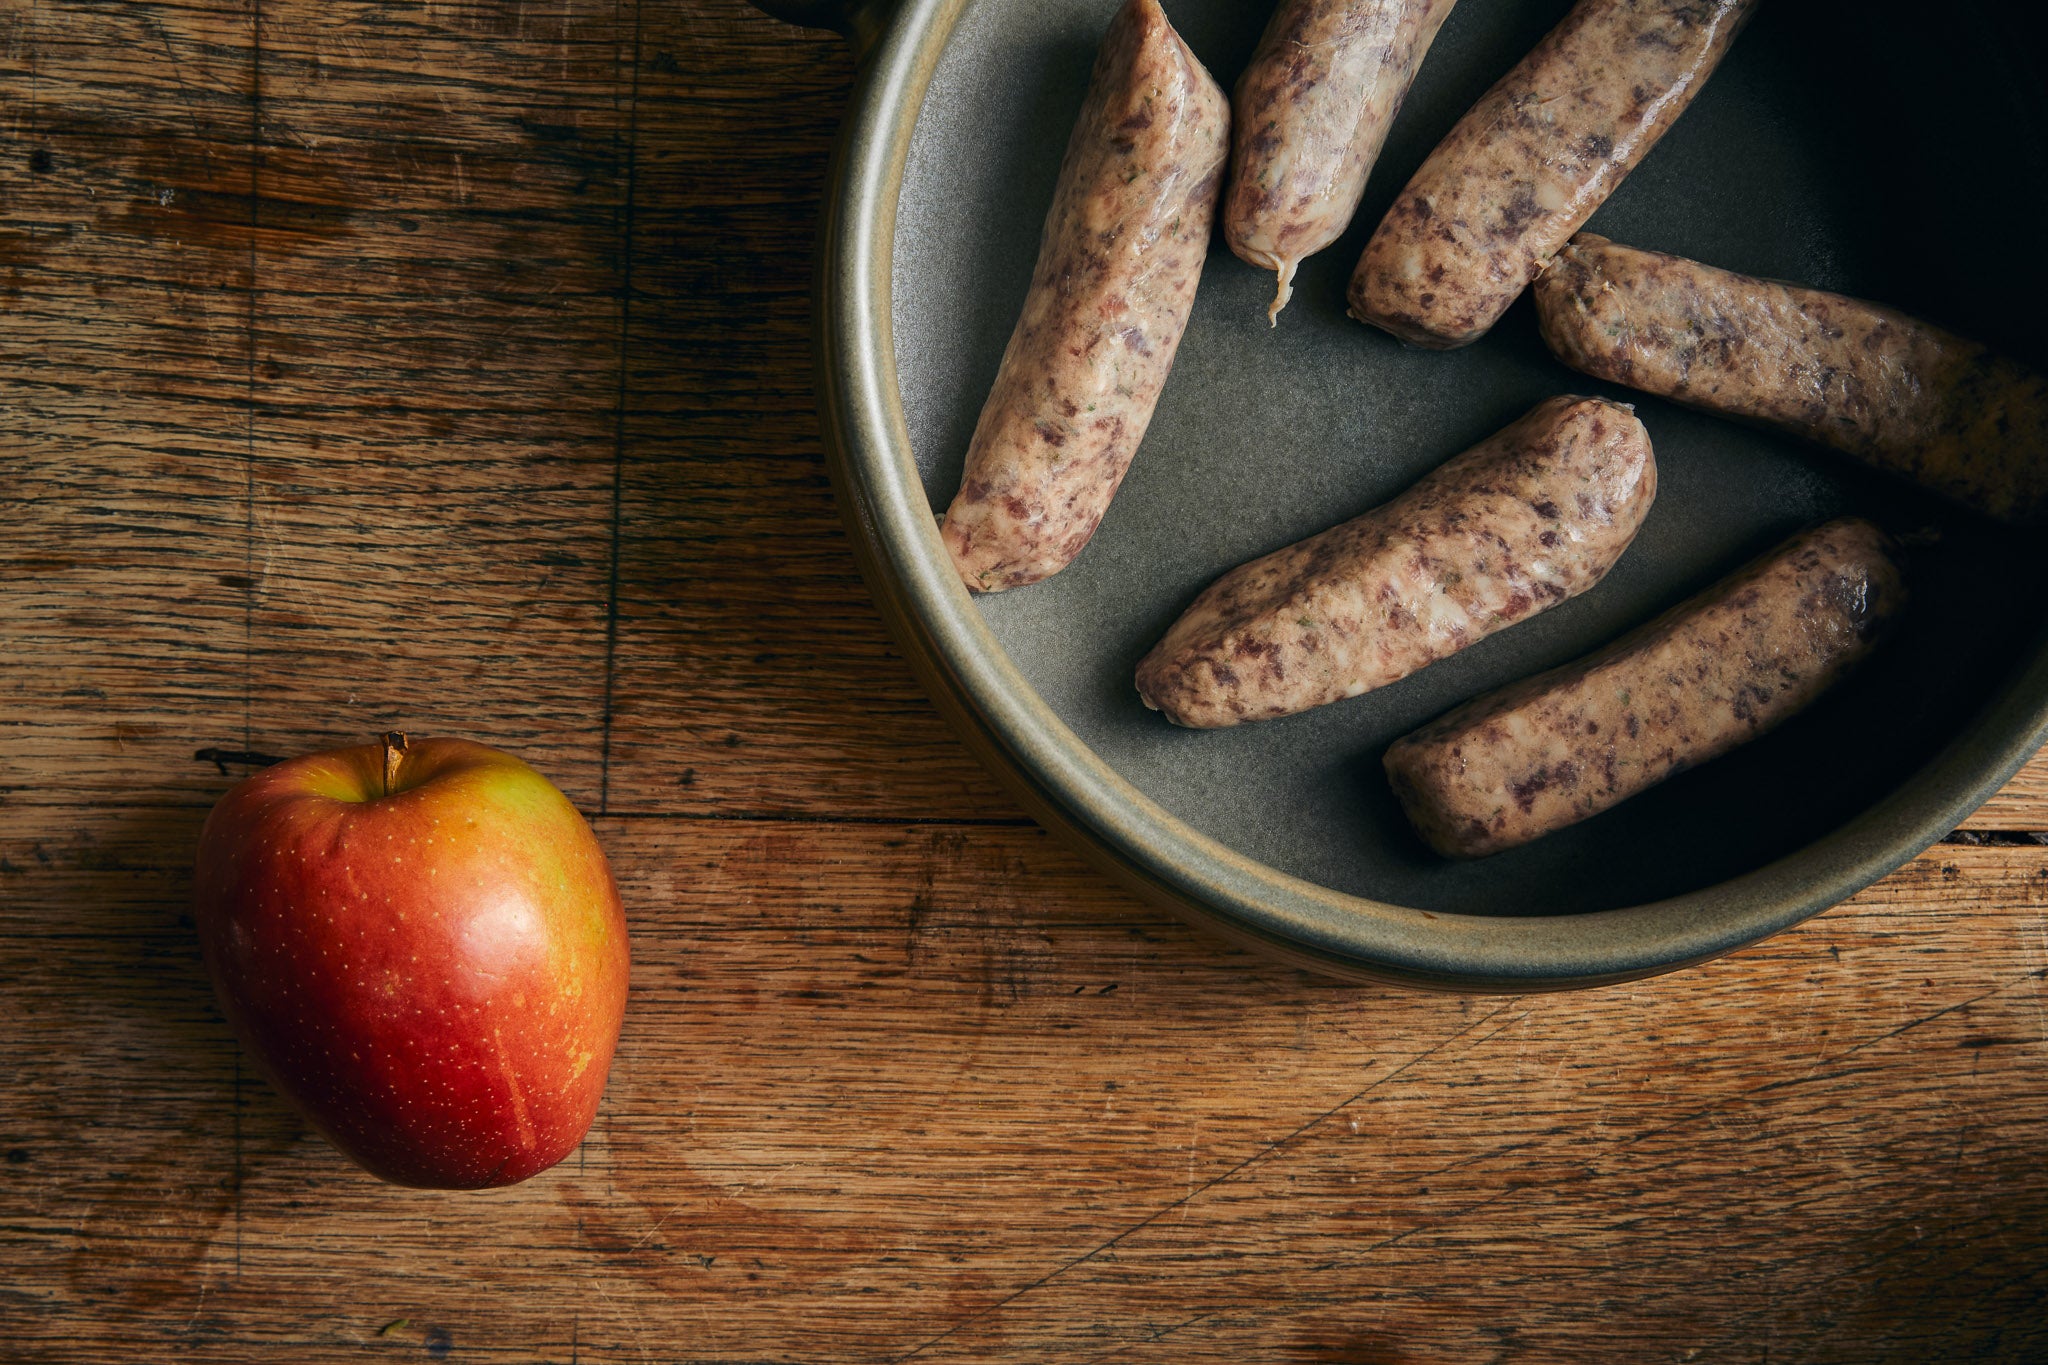 Pork and Apple Sausages